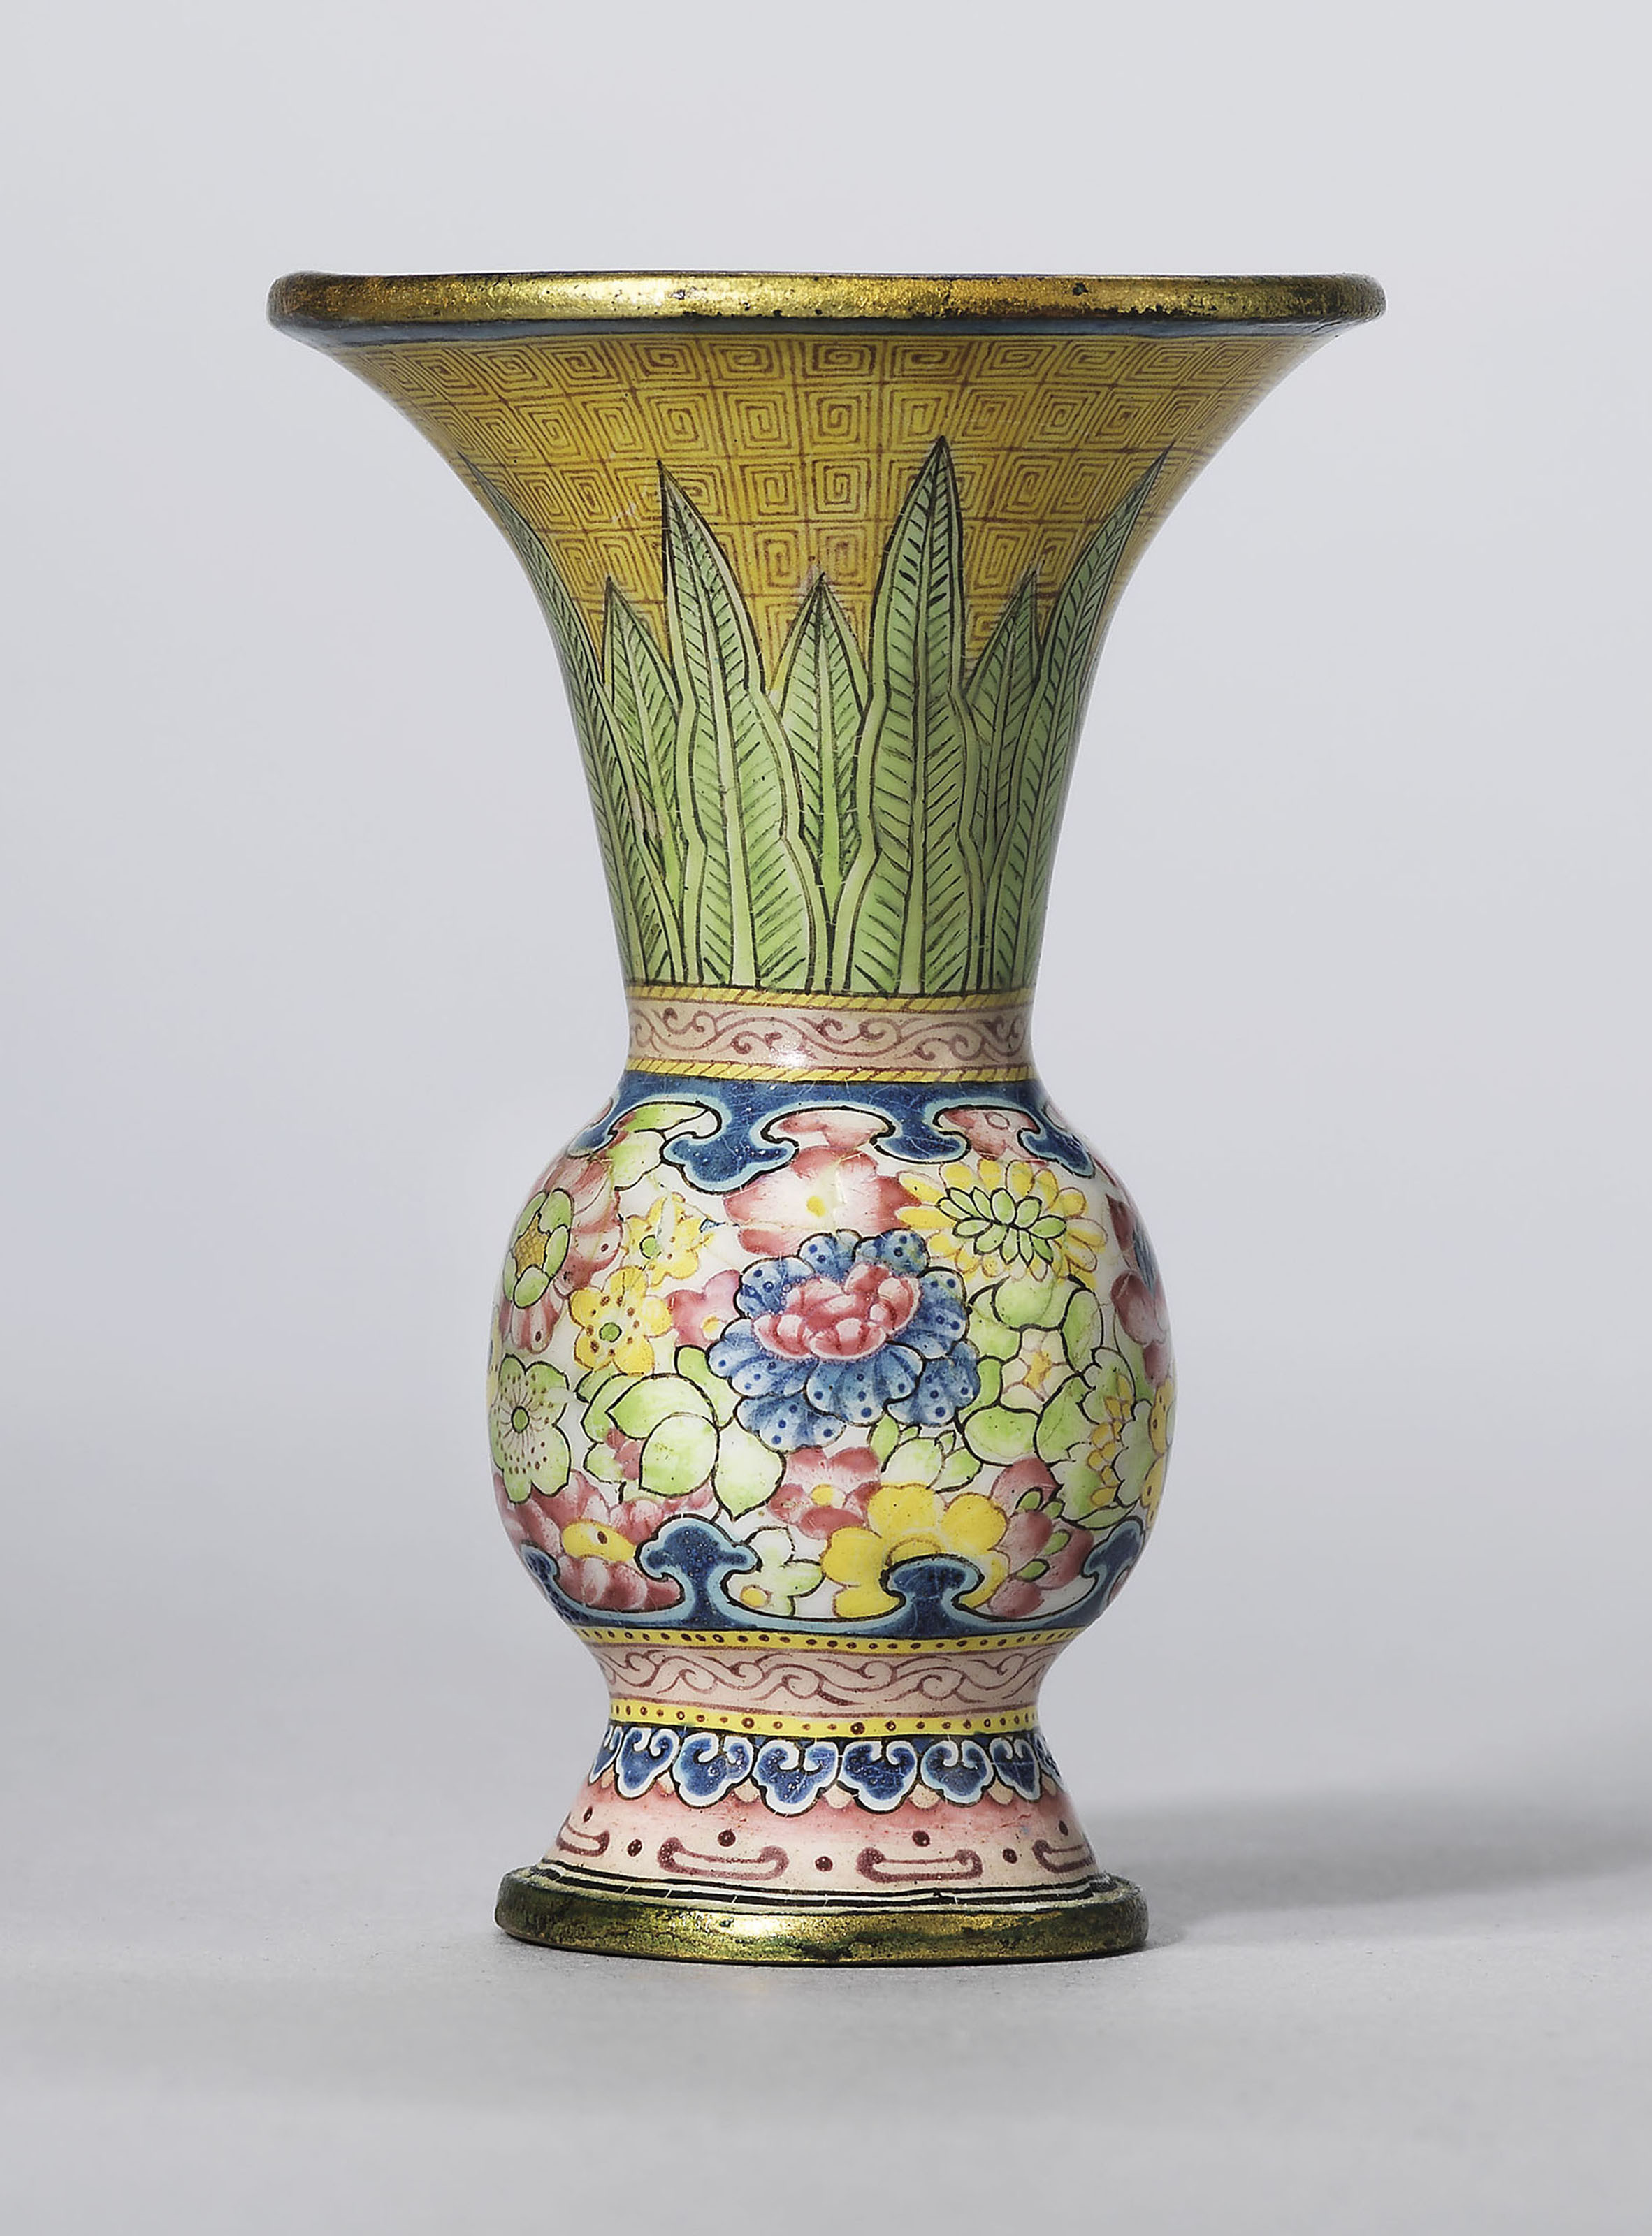 13 Cute Qianlong Emperor Vase 2024 free download qianlong emperor vase of a guide to the symbolism of flowers on chinese ceramics christies within a rare painted enamel gu shaped miniature vase qianlong four character mark in